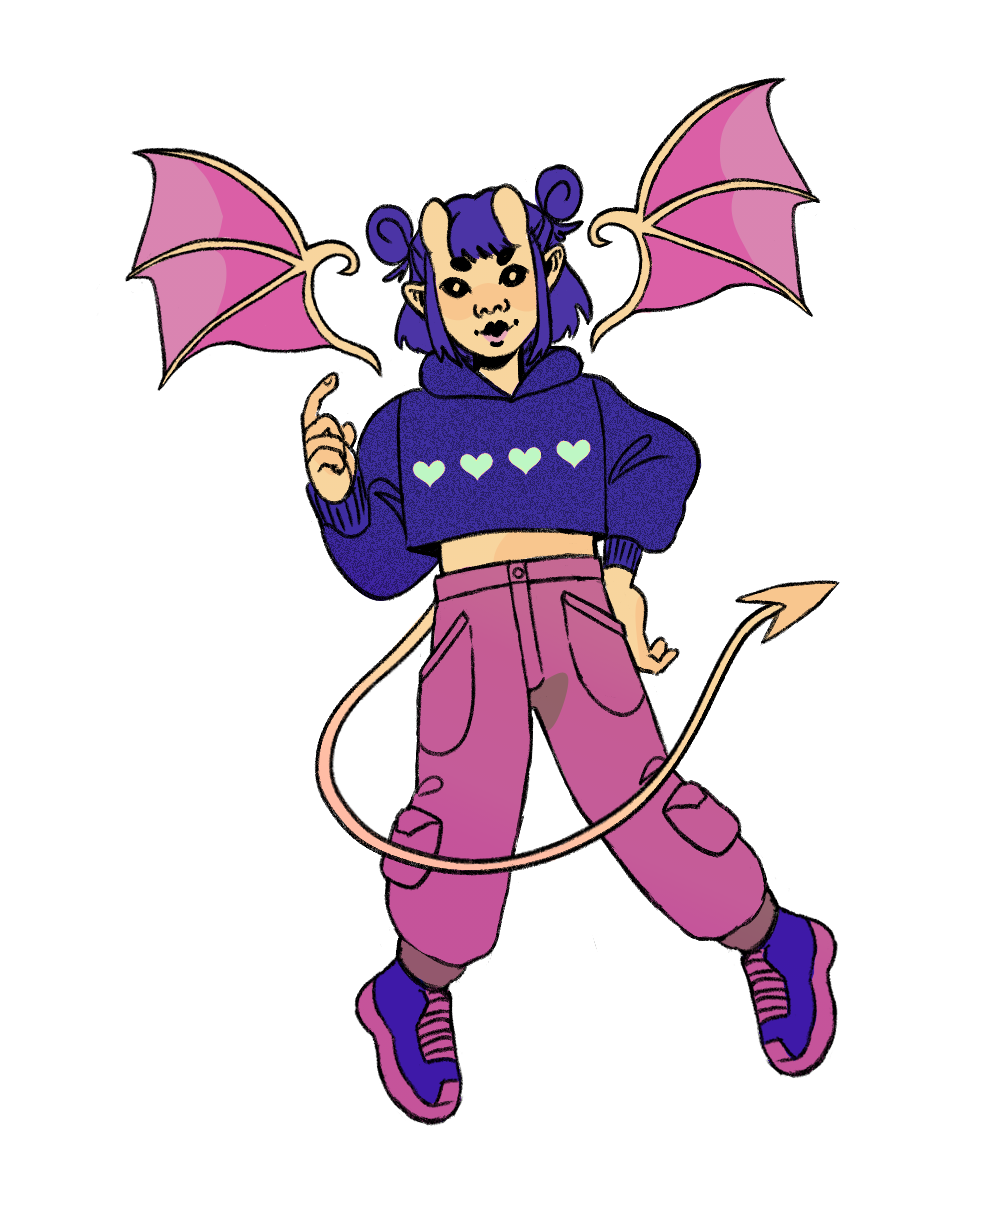 A digital drawing of Zion Aliciakeyes from the video game Blaseball. She is a Chinese Imp wearing pink pants and a cropped hoodie with hearts on the front.